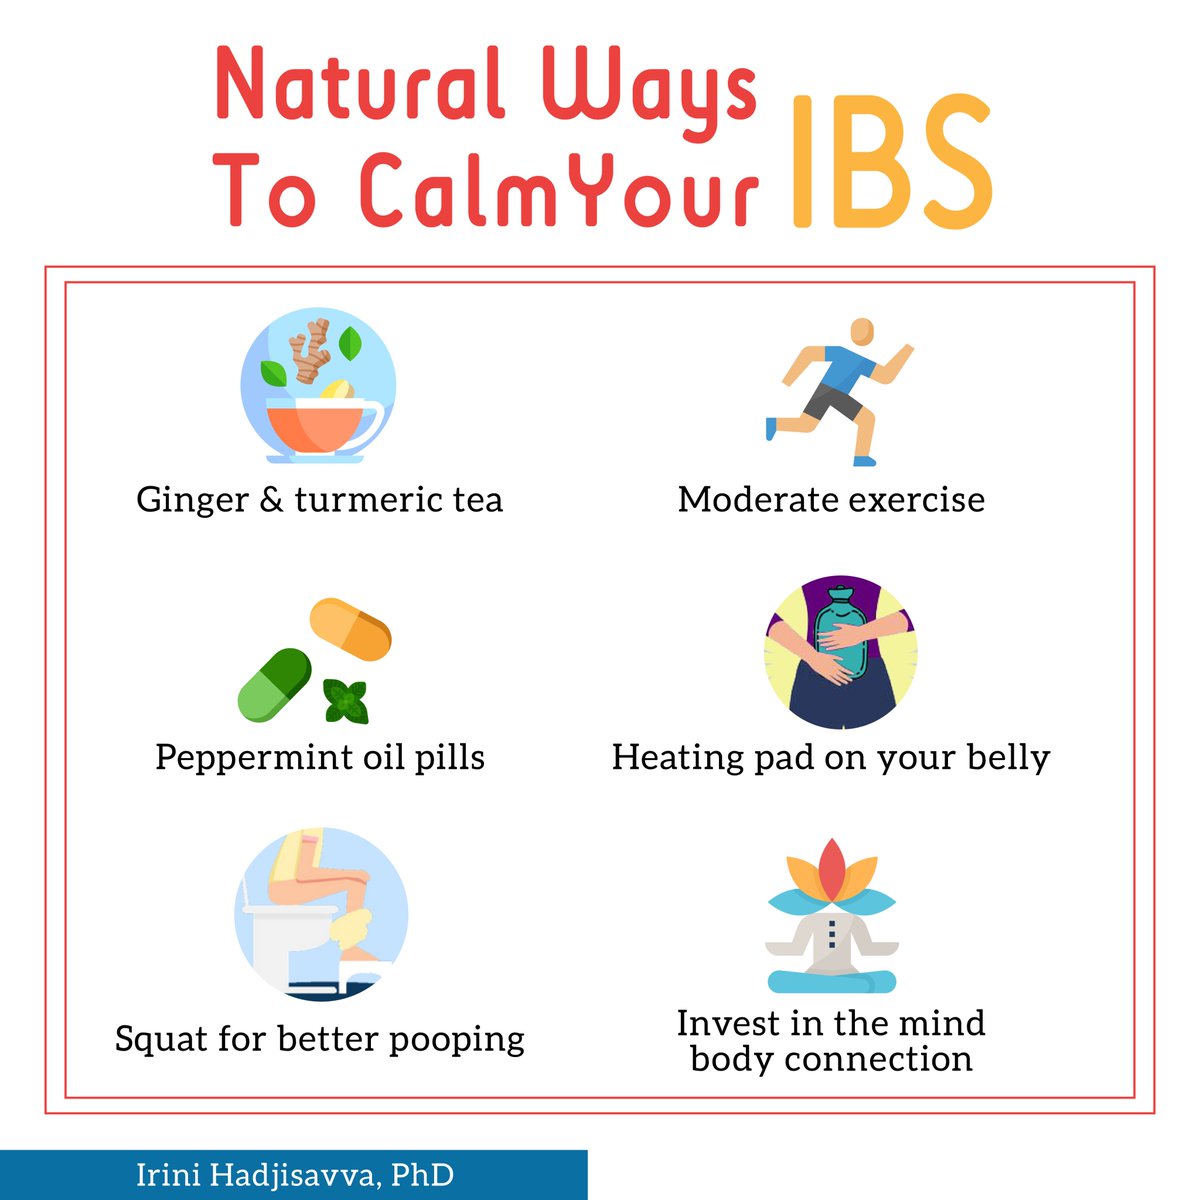 April is #IBSAwarnessMonth. Some natural ways that could help calm your IBS.👇 #IrritableBowelSyndrome #guthealth